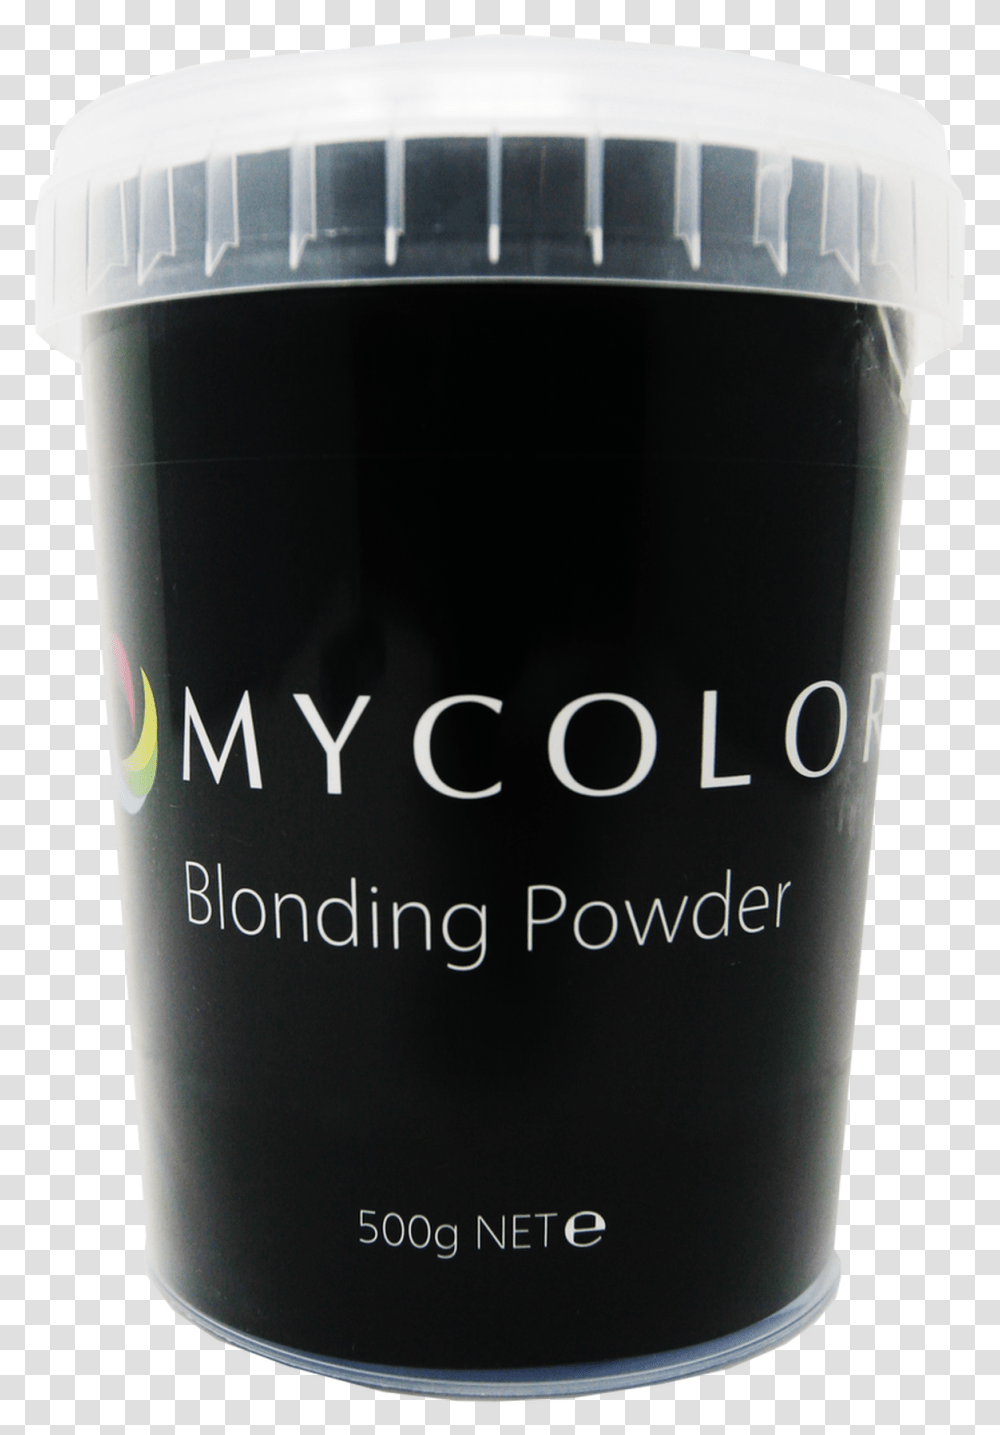 Mycolor Blonding Powder, Coffee Cup, Beer, Alcohol, Beverage Transparent Png